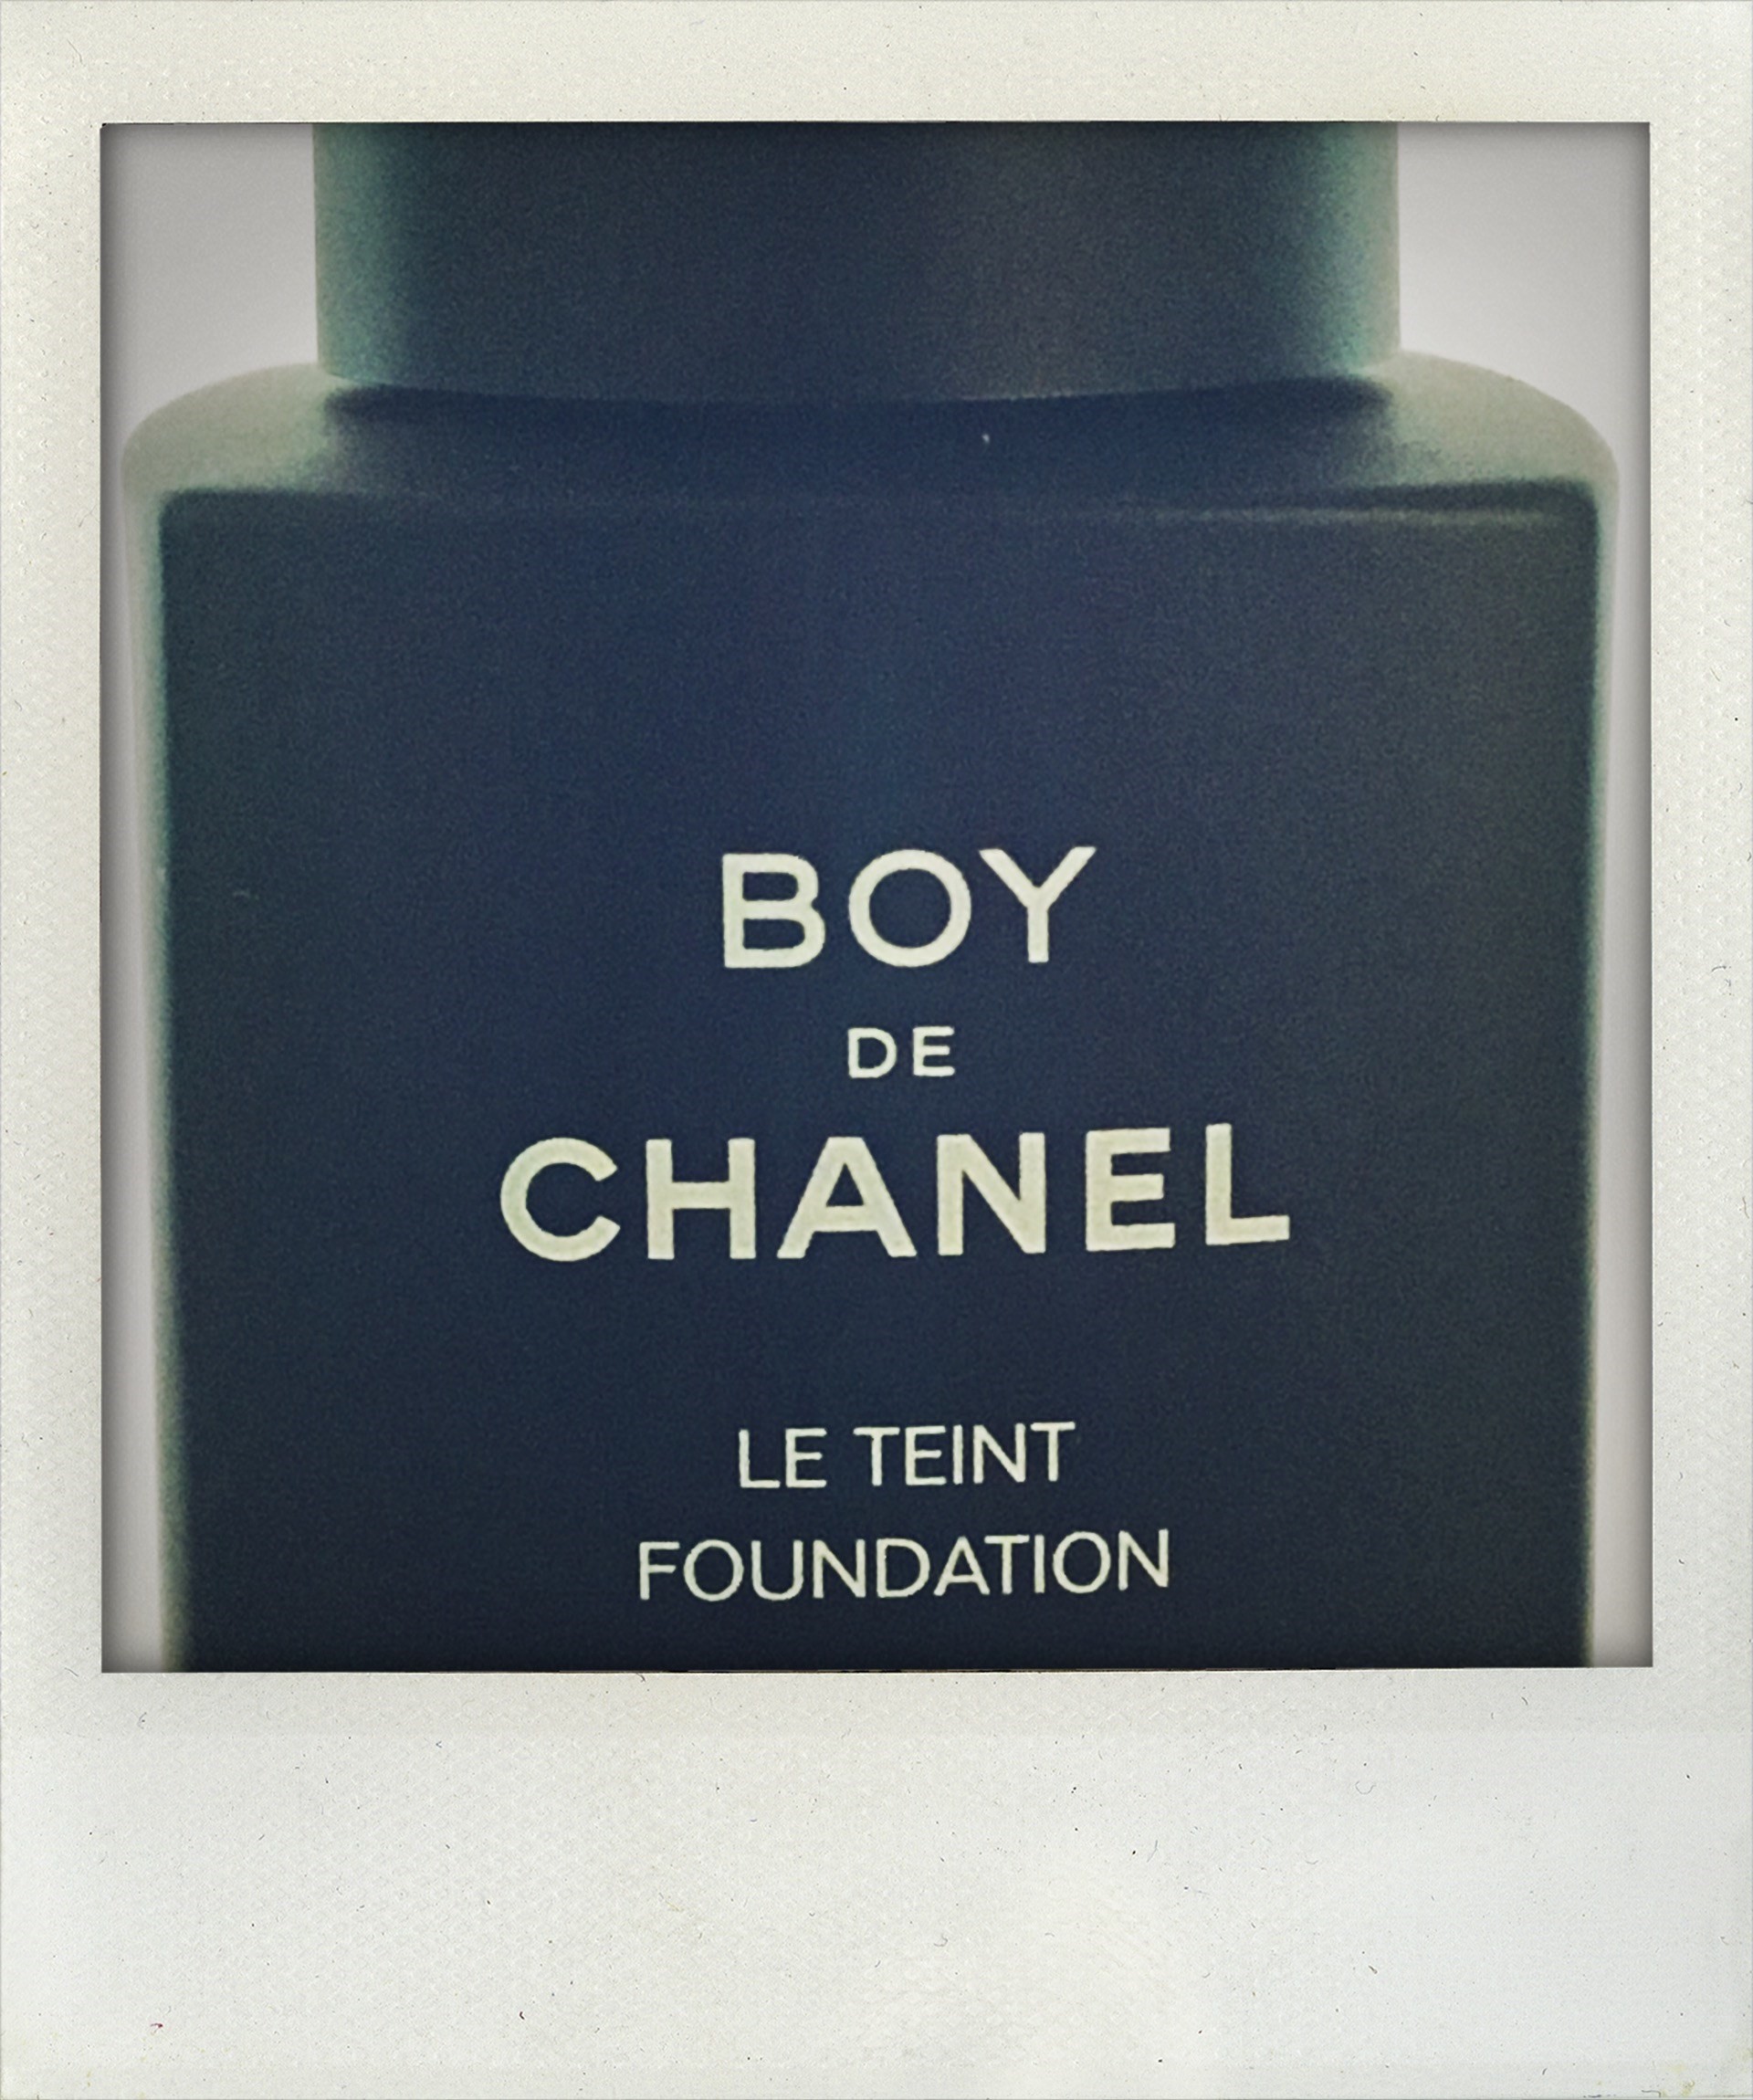 A guide to makeup for men with Boy de Chanel